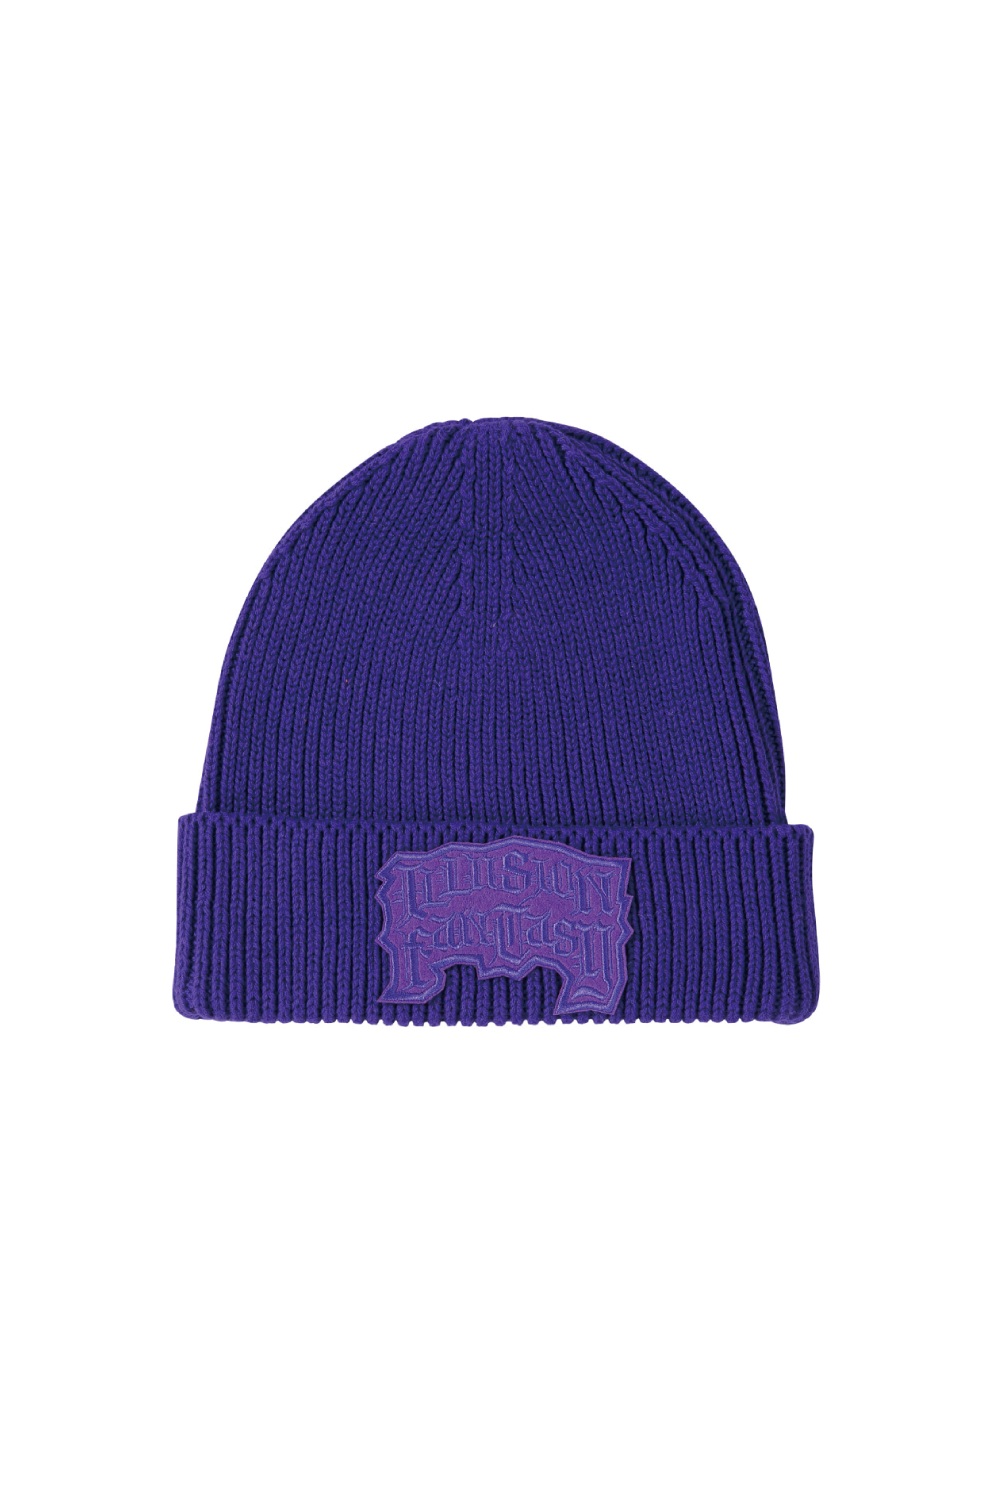 [SALE] ILLUSION FANTASY PATCHED BEANIE (PURPLE)GRAFFITIONMIND